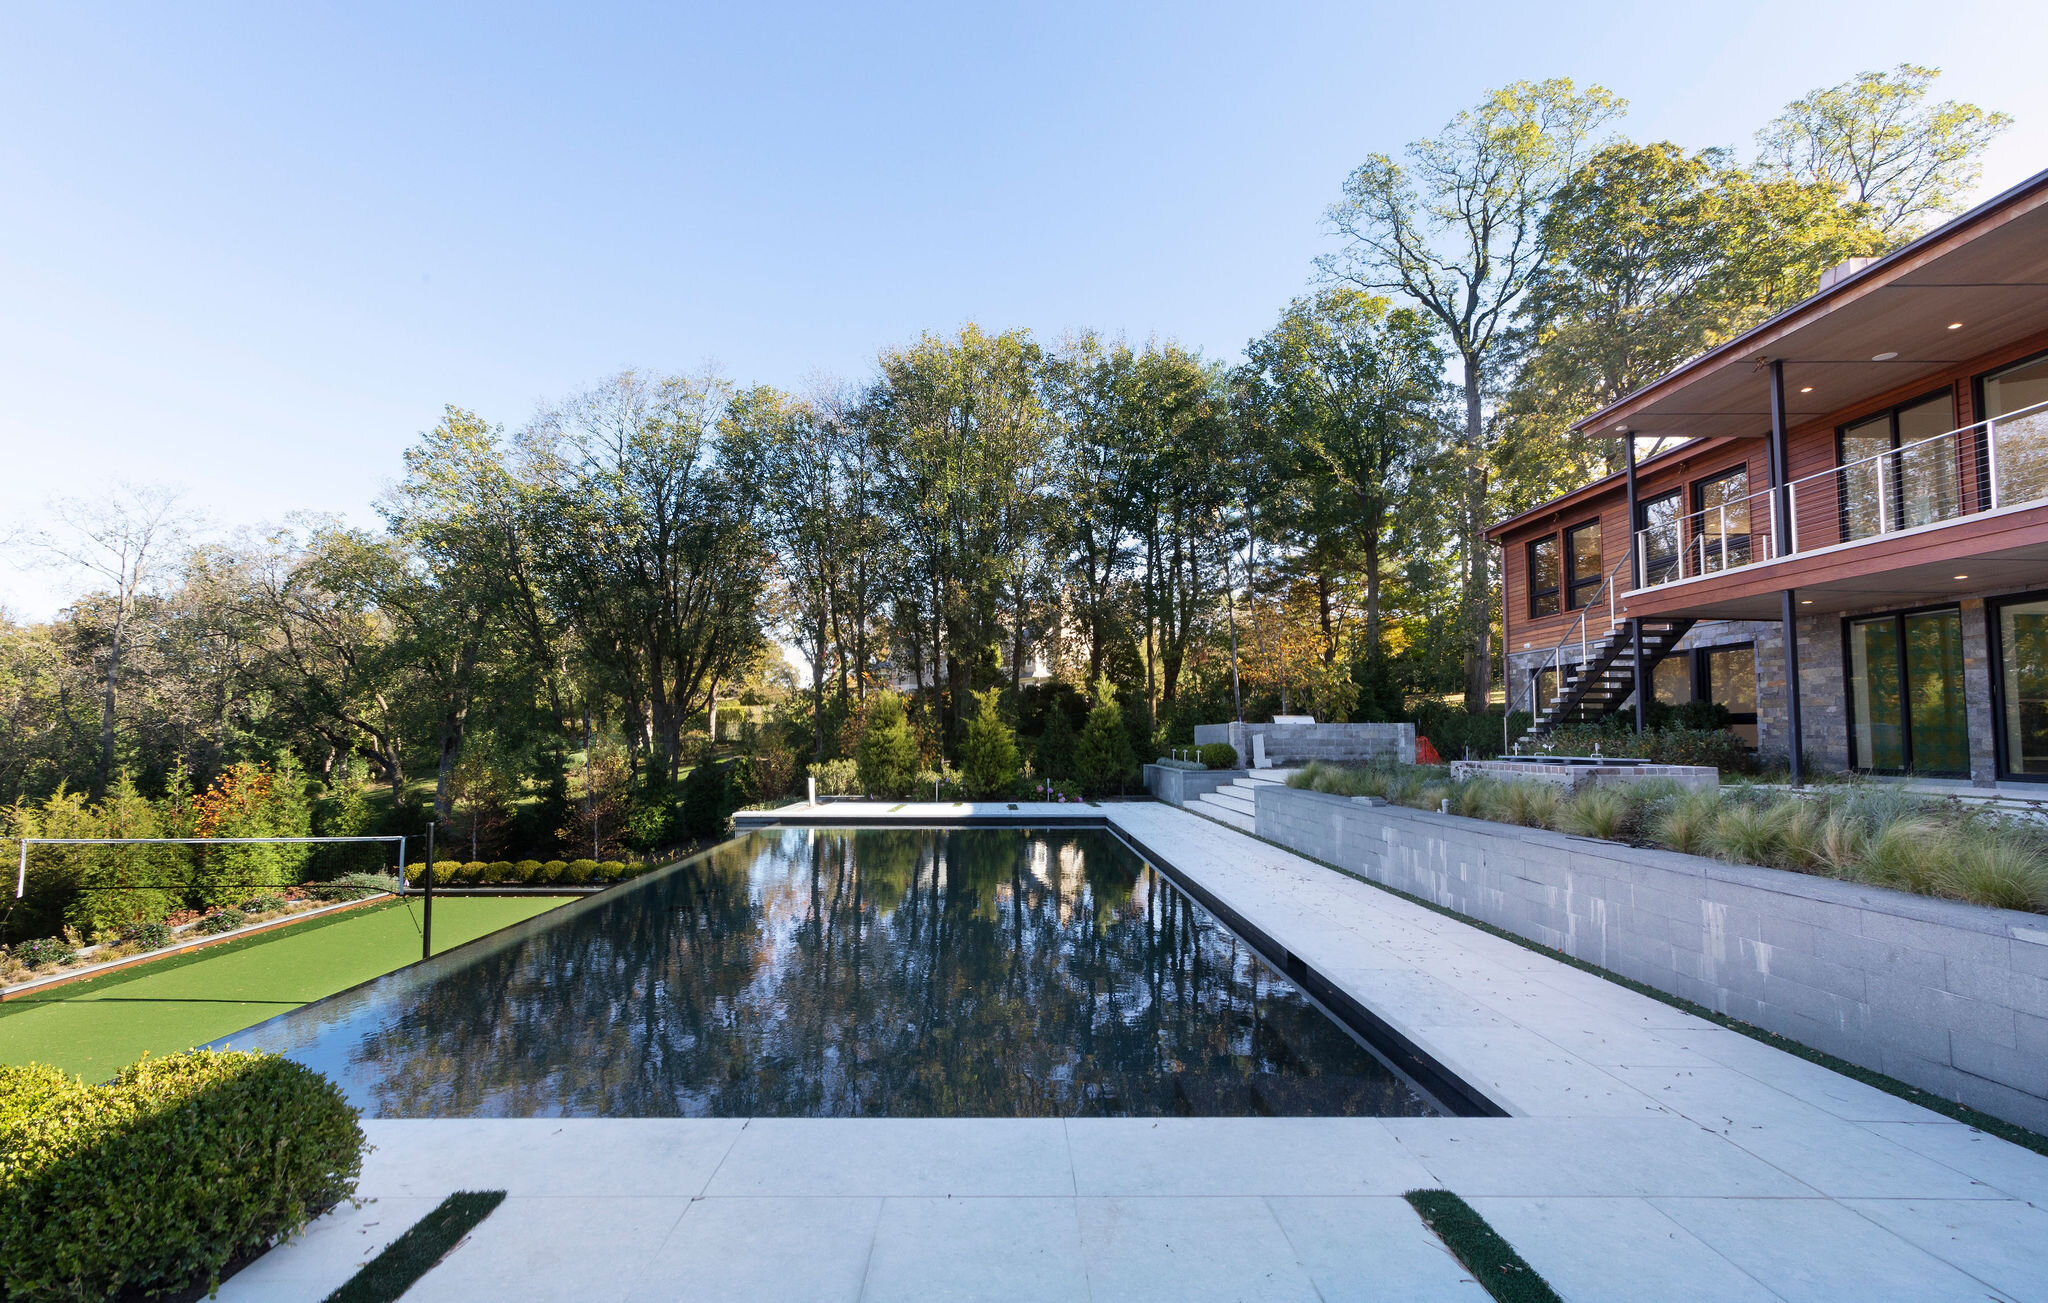  The whole exterior was meant to harmonize with the incredible backyard which leads directly to the Long Island Sound. The pool was completely redesigned to flow into the Bacchi Court. 